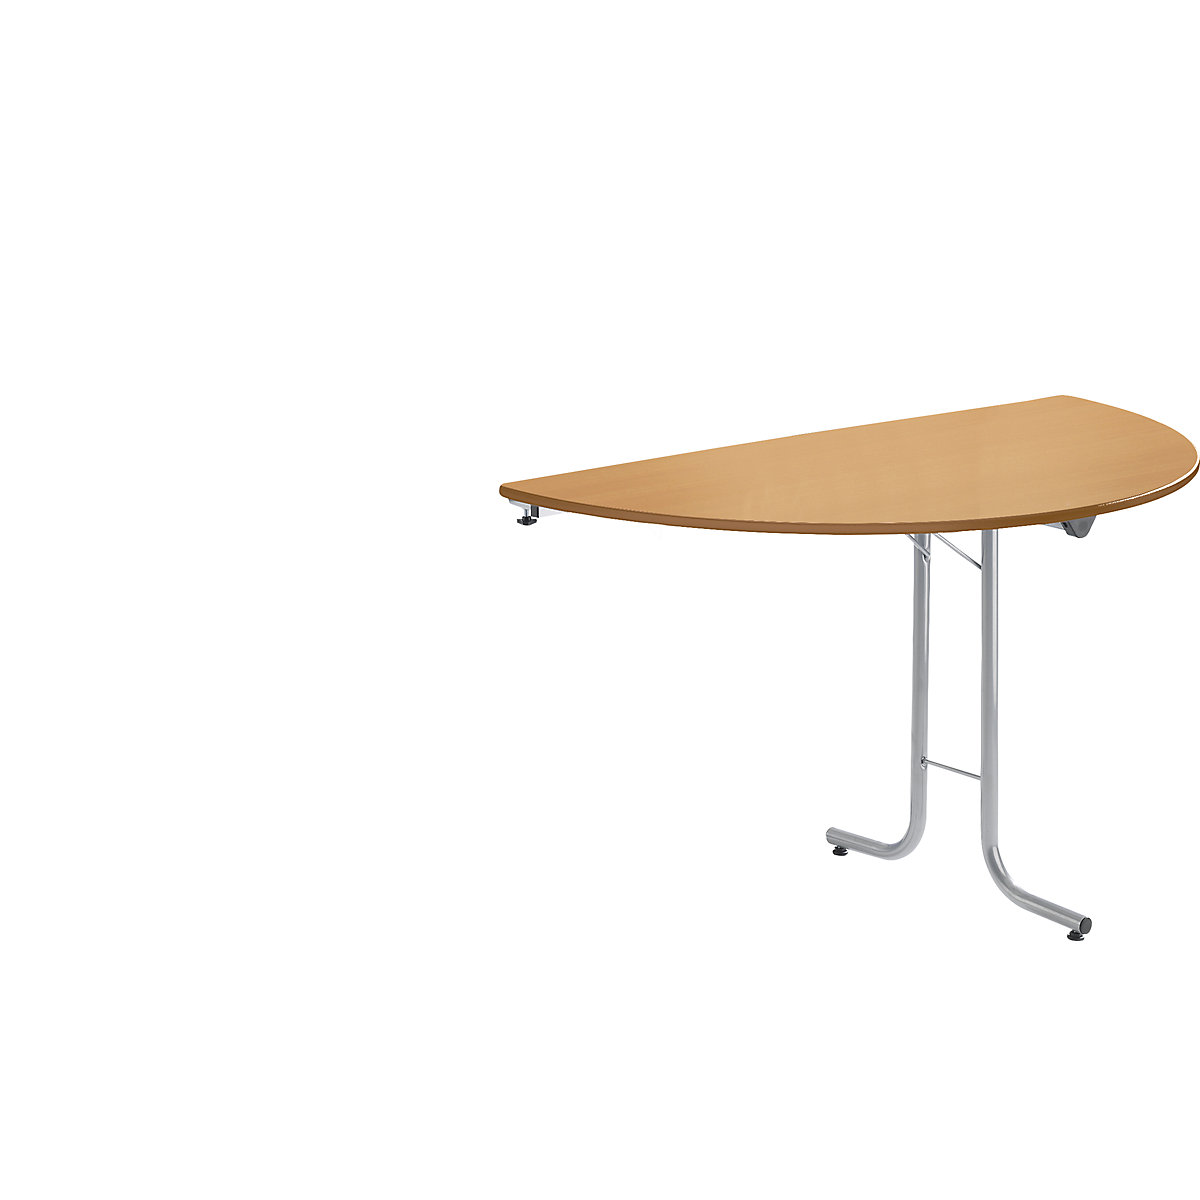 Extension table for folding table, semicircular top, 1400 x 700 mm, aluminium coloured frame, beech finish tabletop-3